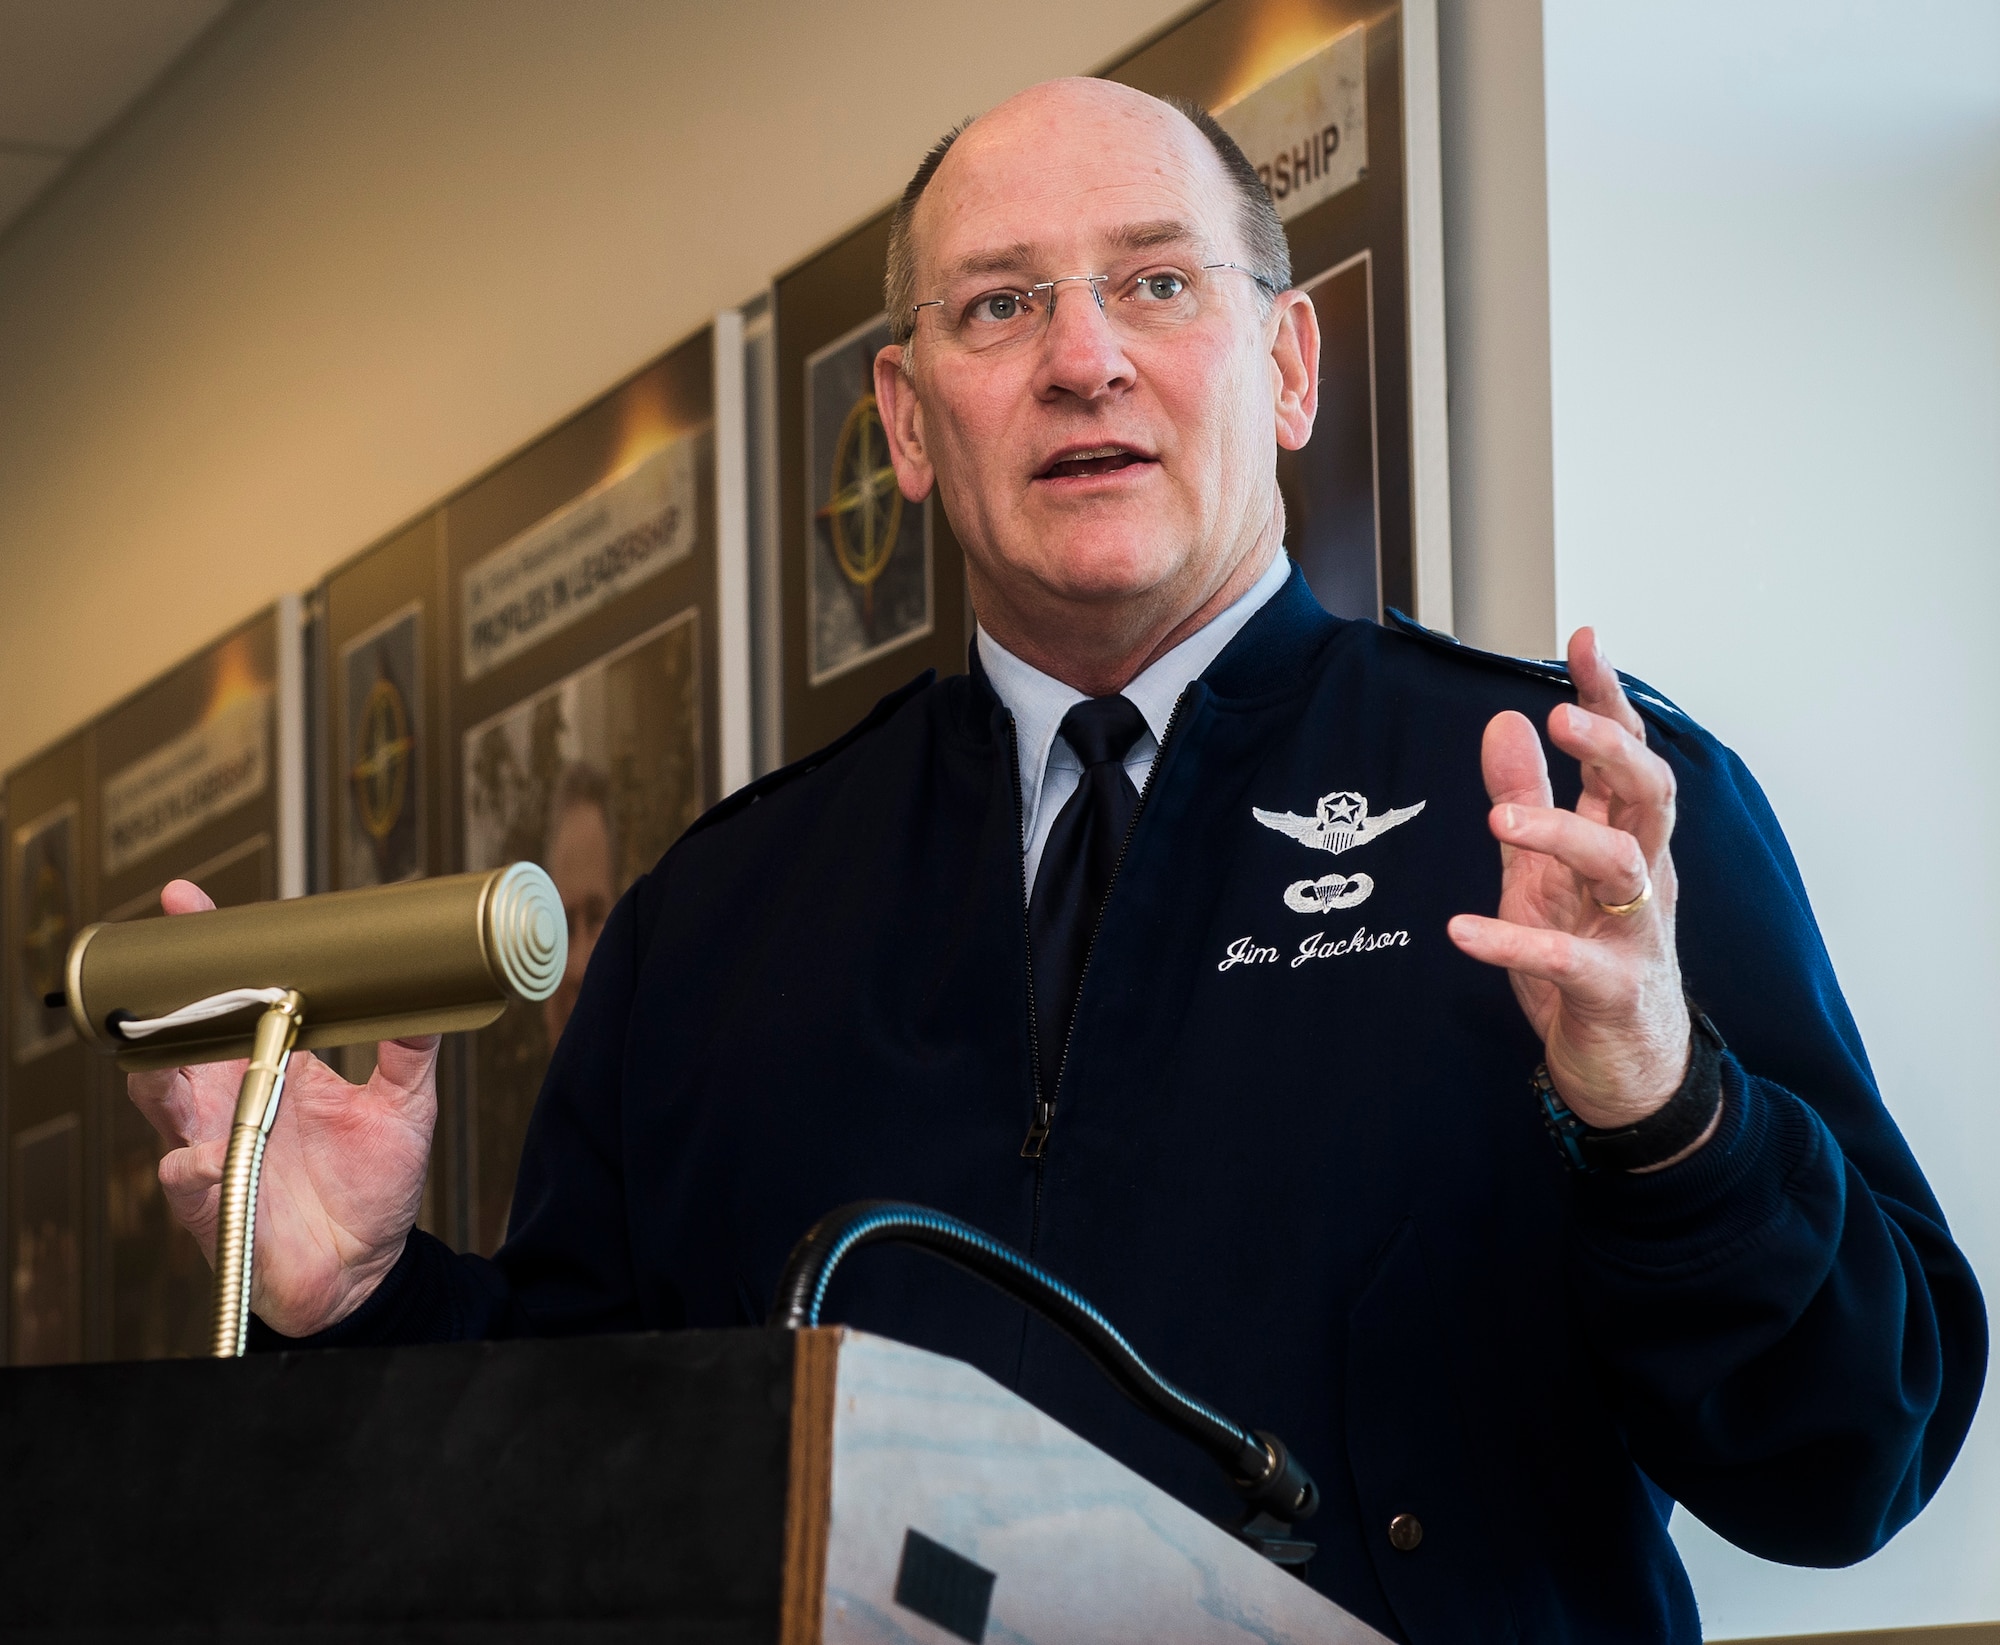 Chief of the Air Force Reserve Lt. Gen. James Jackson gives his remarks prior to unveiling the Profiles in Leadership display in the Pentagon, Washington D.C., Dec. 7, 2015. The display highlights outstanding examples of leadership in the Air Reserve forces, and celebrates and honors Citizen Airmen's contributions in serving the nation. (U.S. Air Force Photo/Jim Varhegyi)